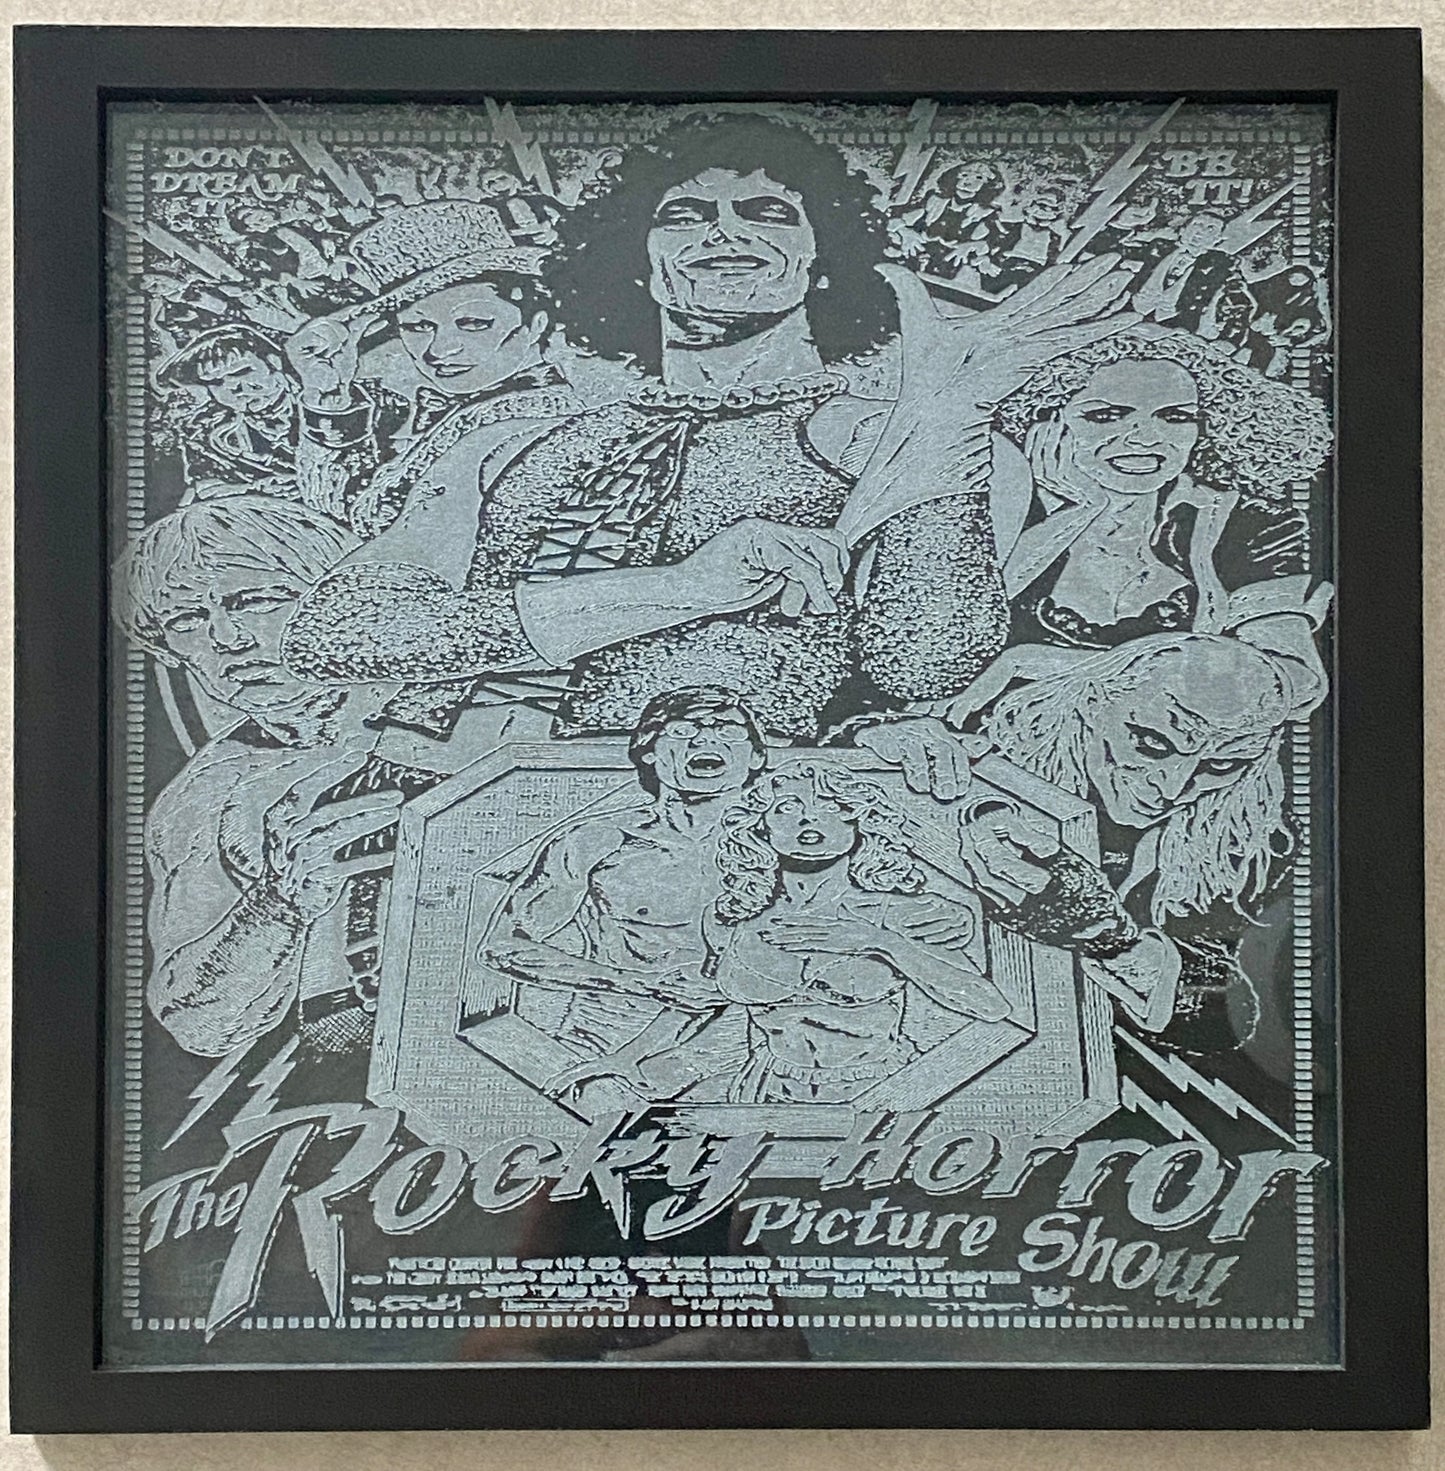 Rocky Horror Picture Show Movie Poster Engraving on Glass